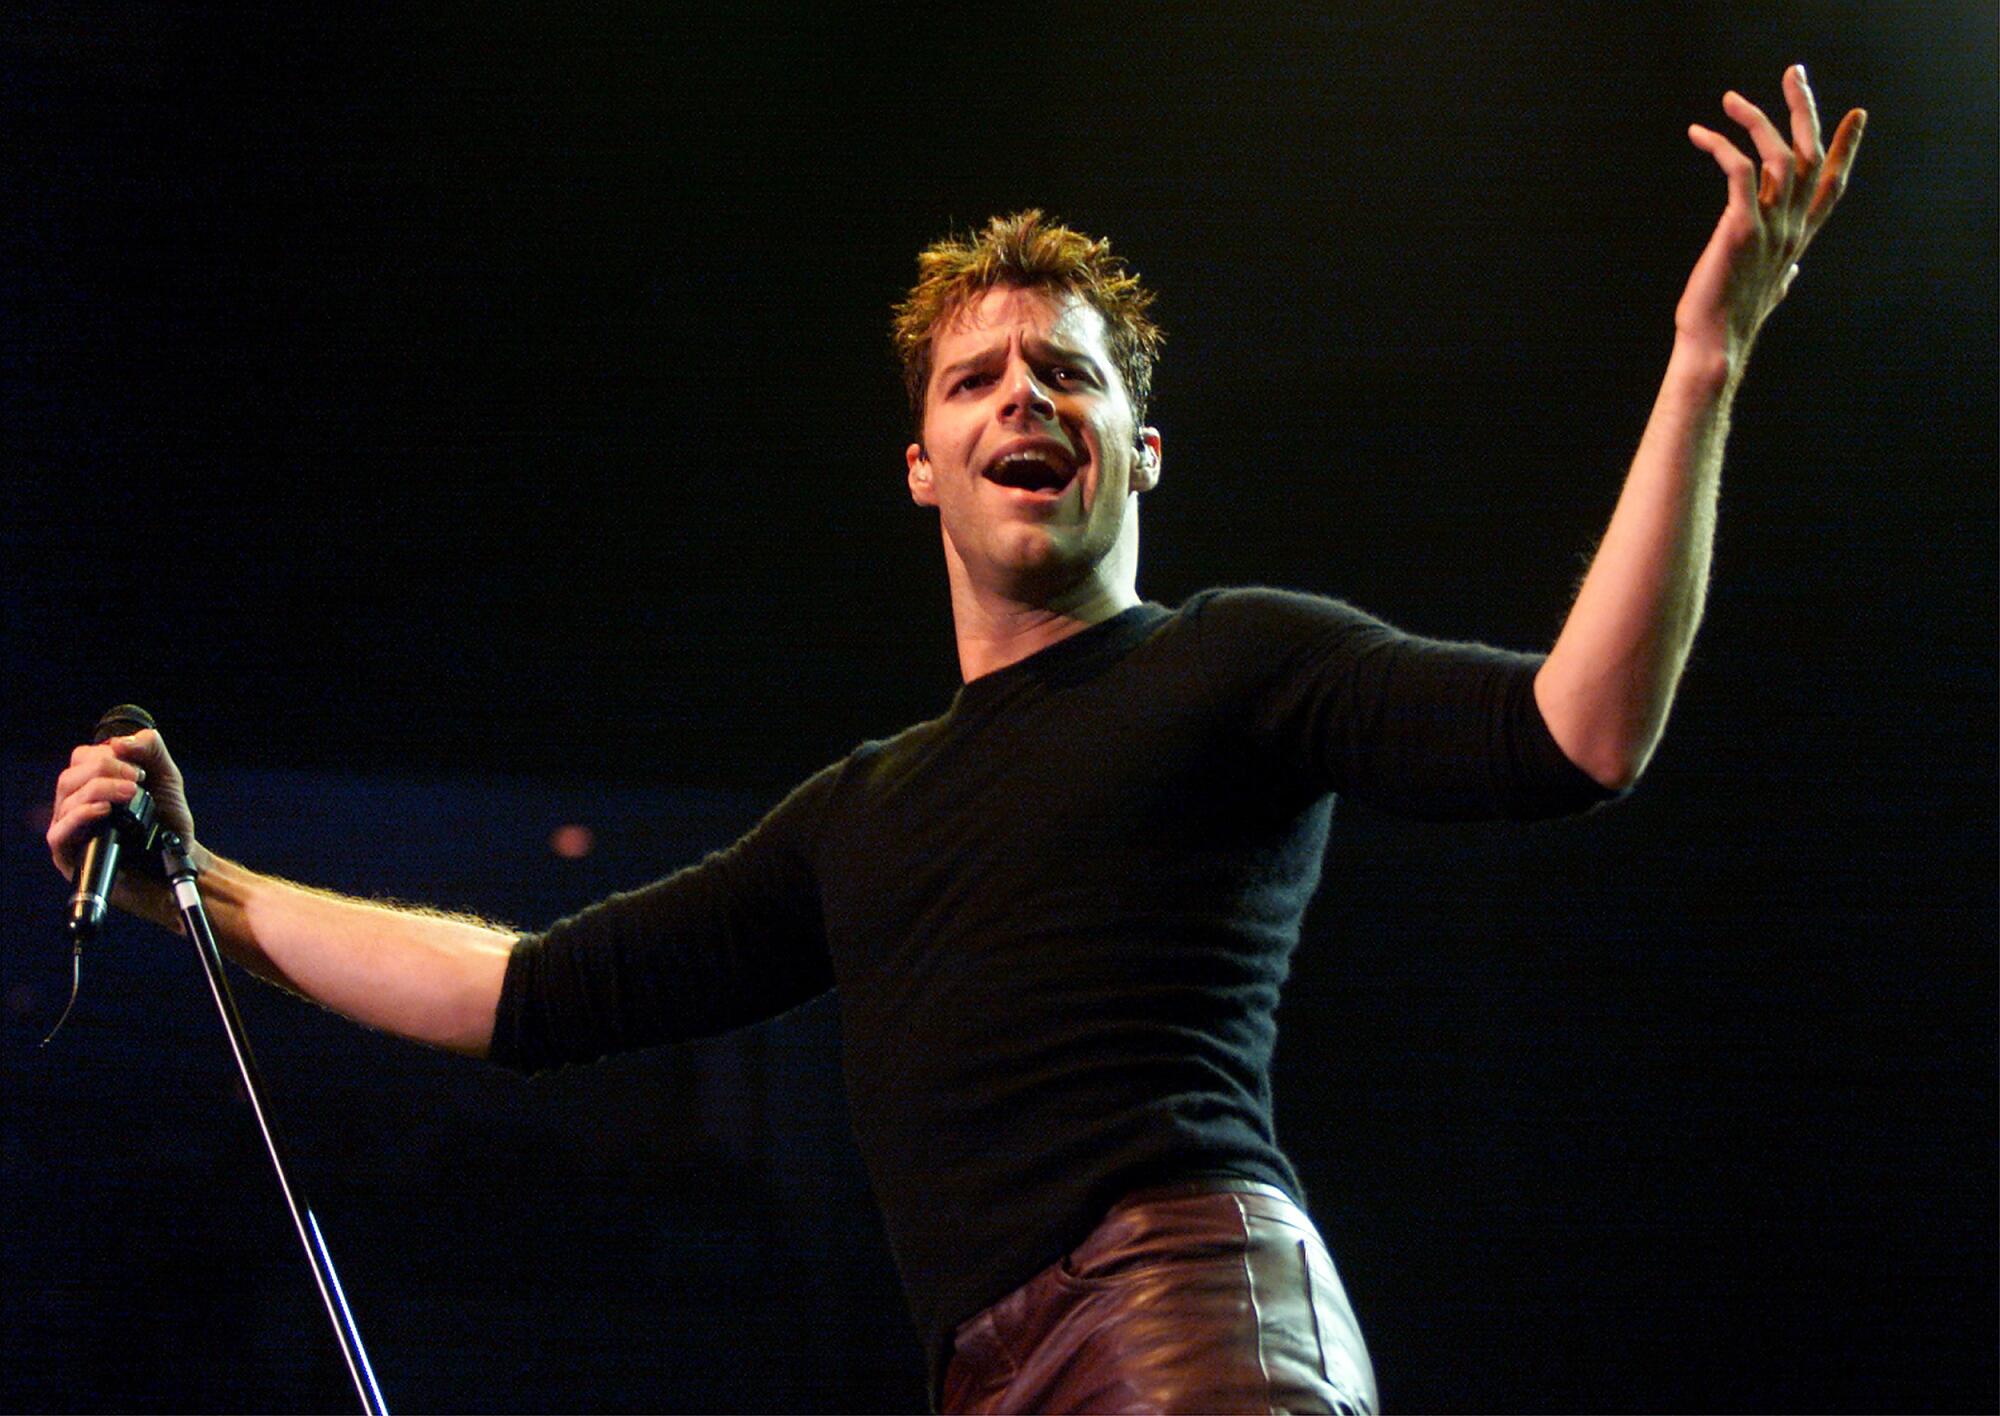 Latin pop star Ricky Martin performs during a concert  in Las Vegas in 1999.